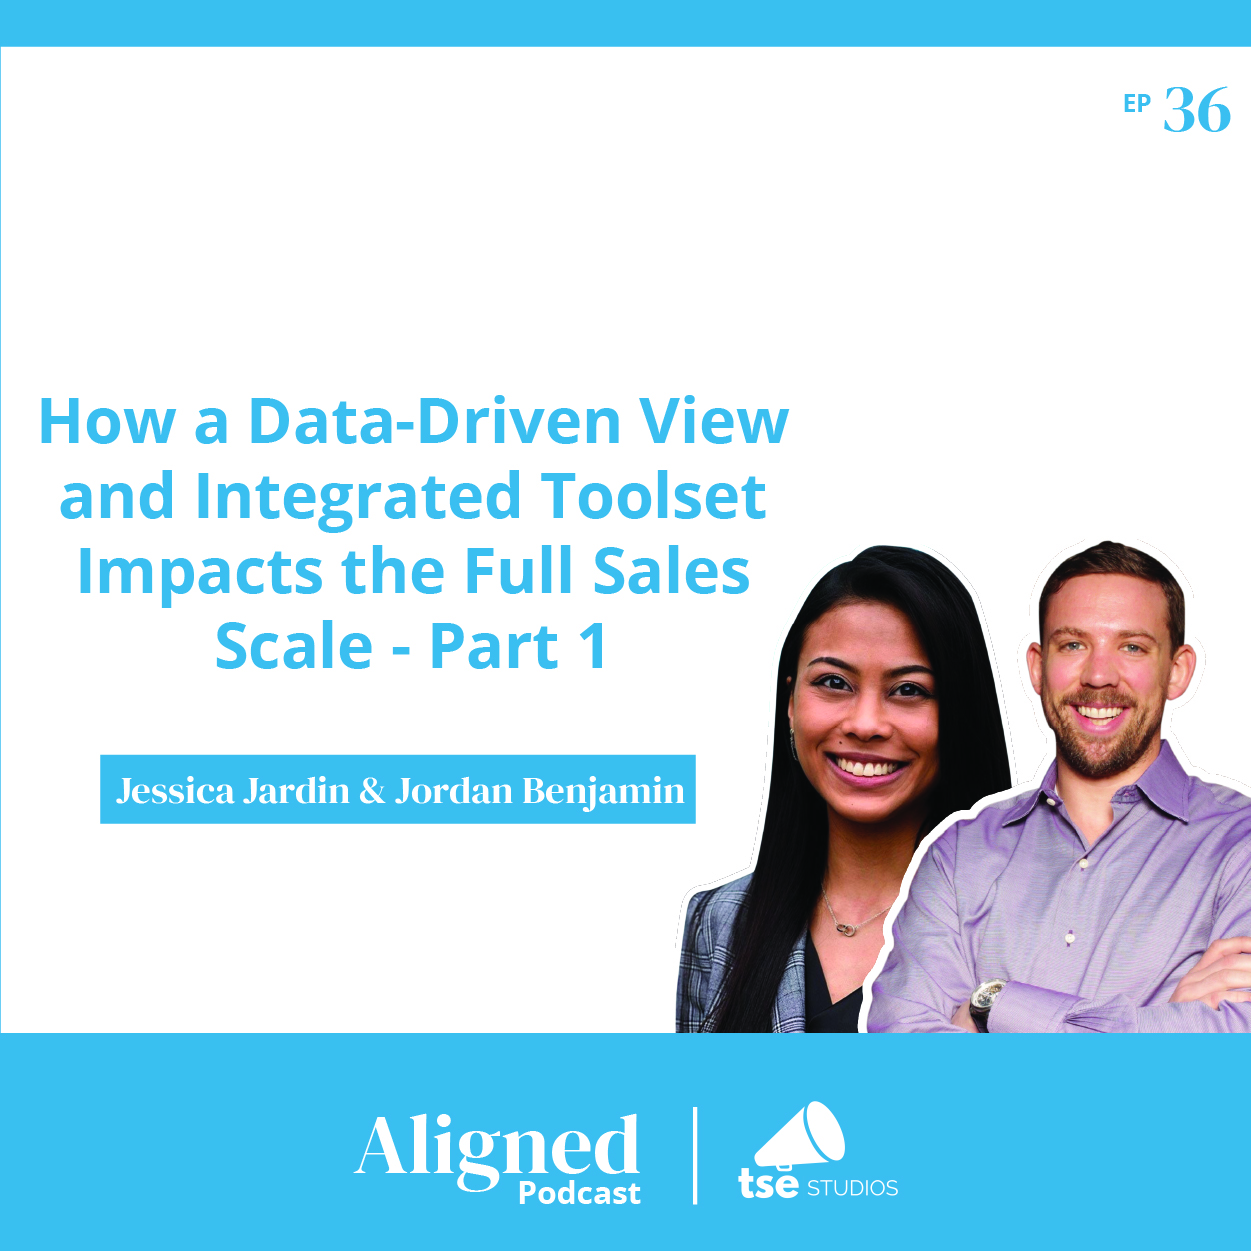 How a Data-Driven View and Integrated Toolset Impacts the Full Sales Scale - Part 1